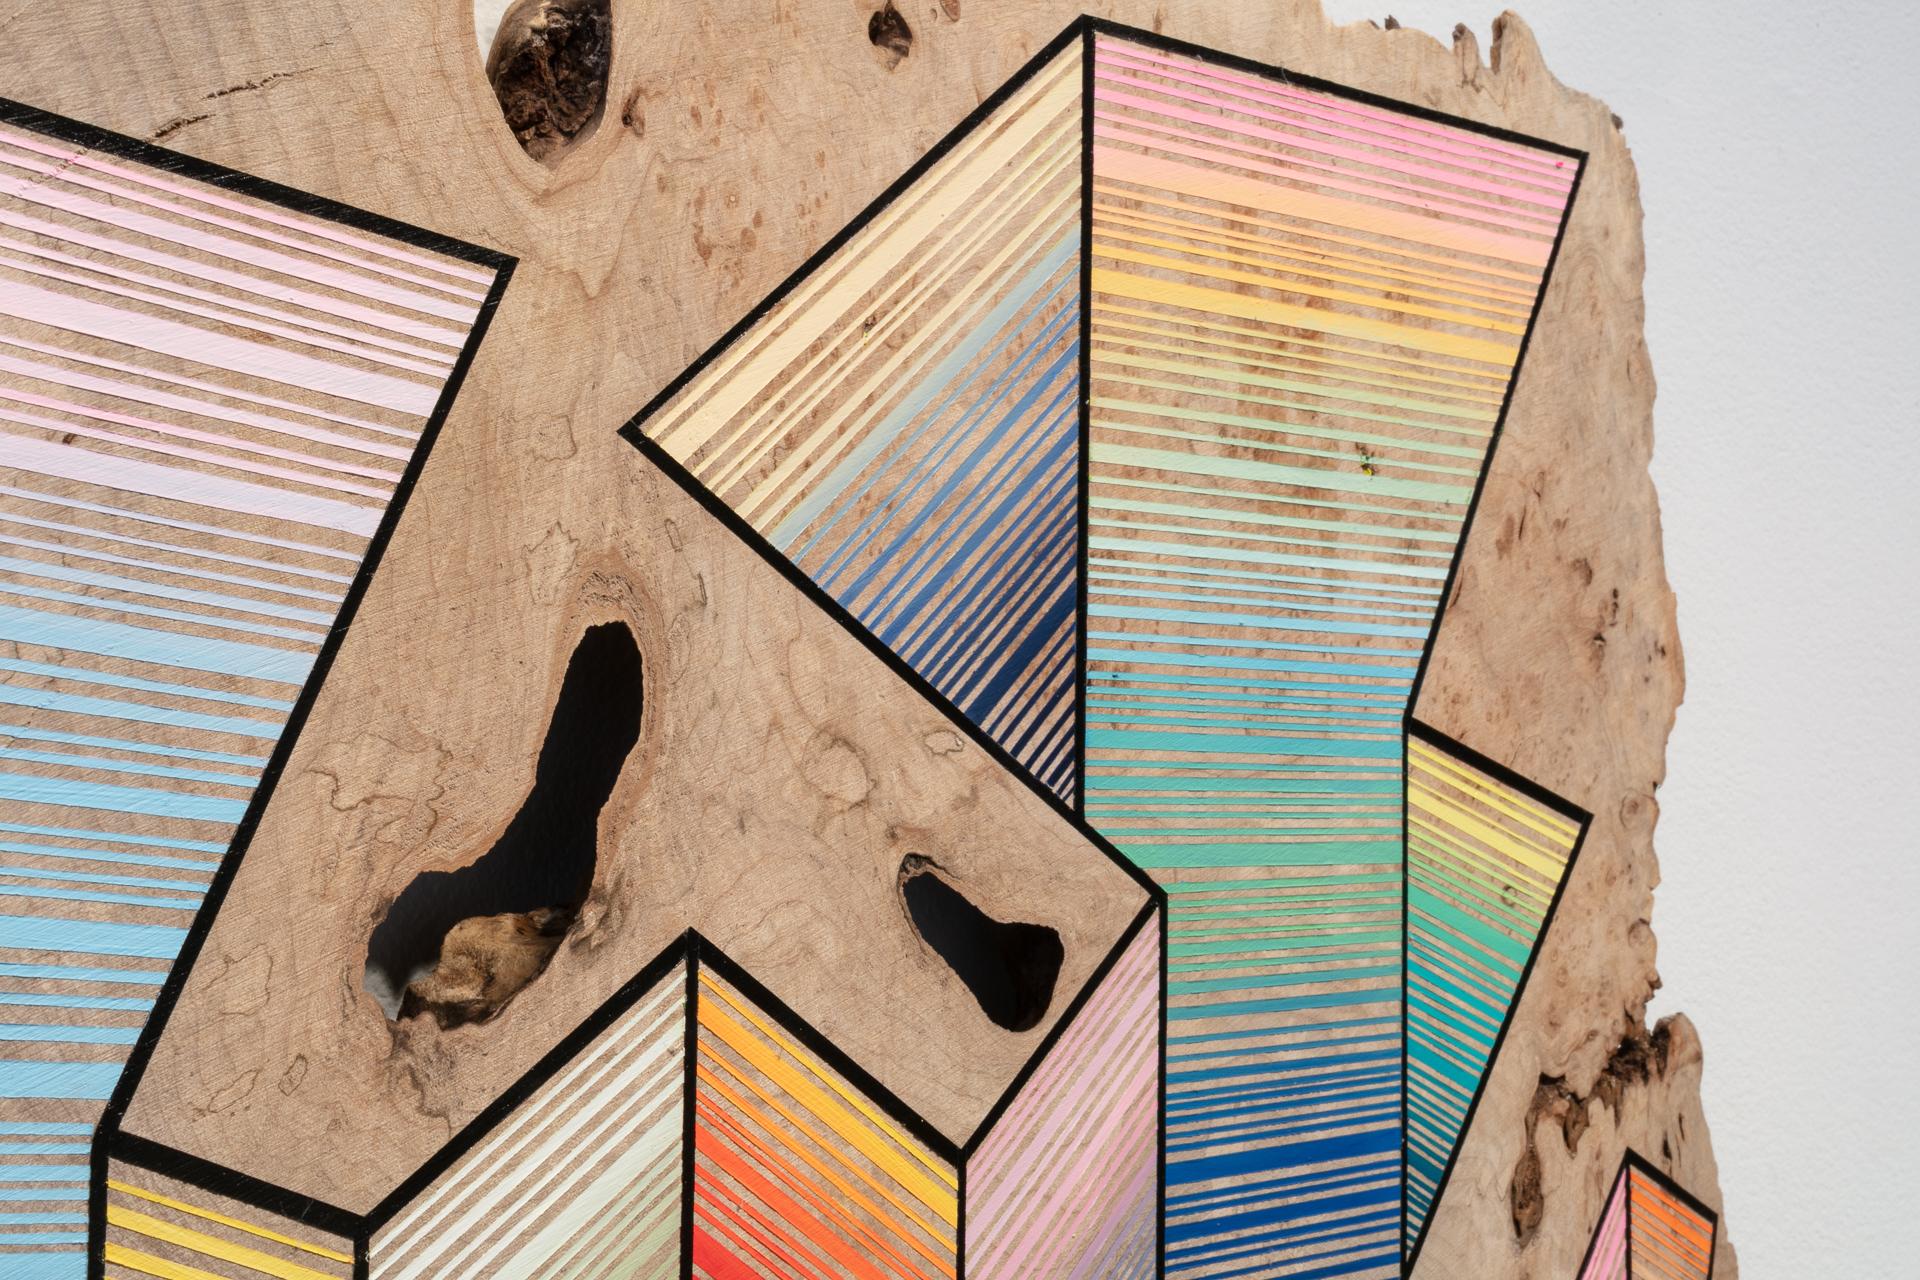 Hudson, NY - based artist Jason Middlebrook. Middlebrook takes inspiration from lived experience and the natural world with his signature hardwood paintings.

Familiar yet enigmatic, the sky in its various forms serves as muse in 